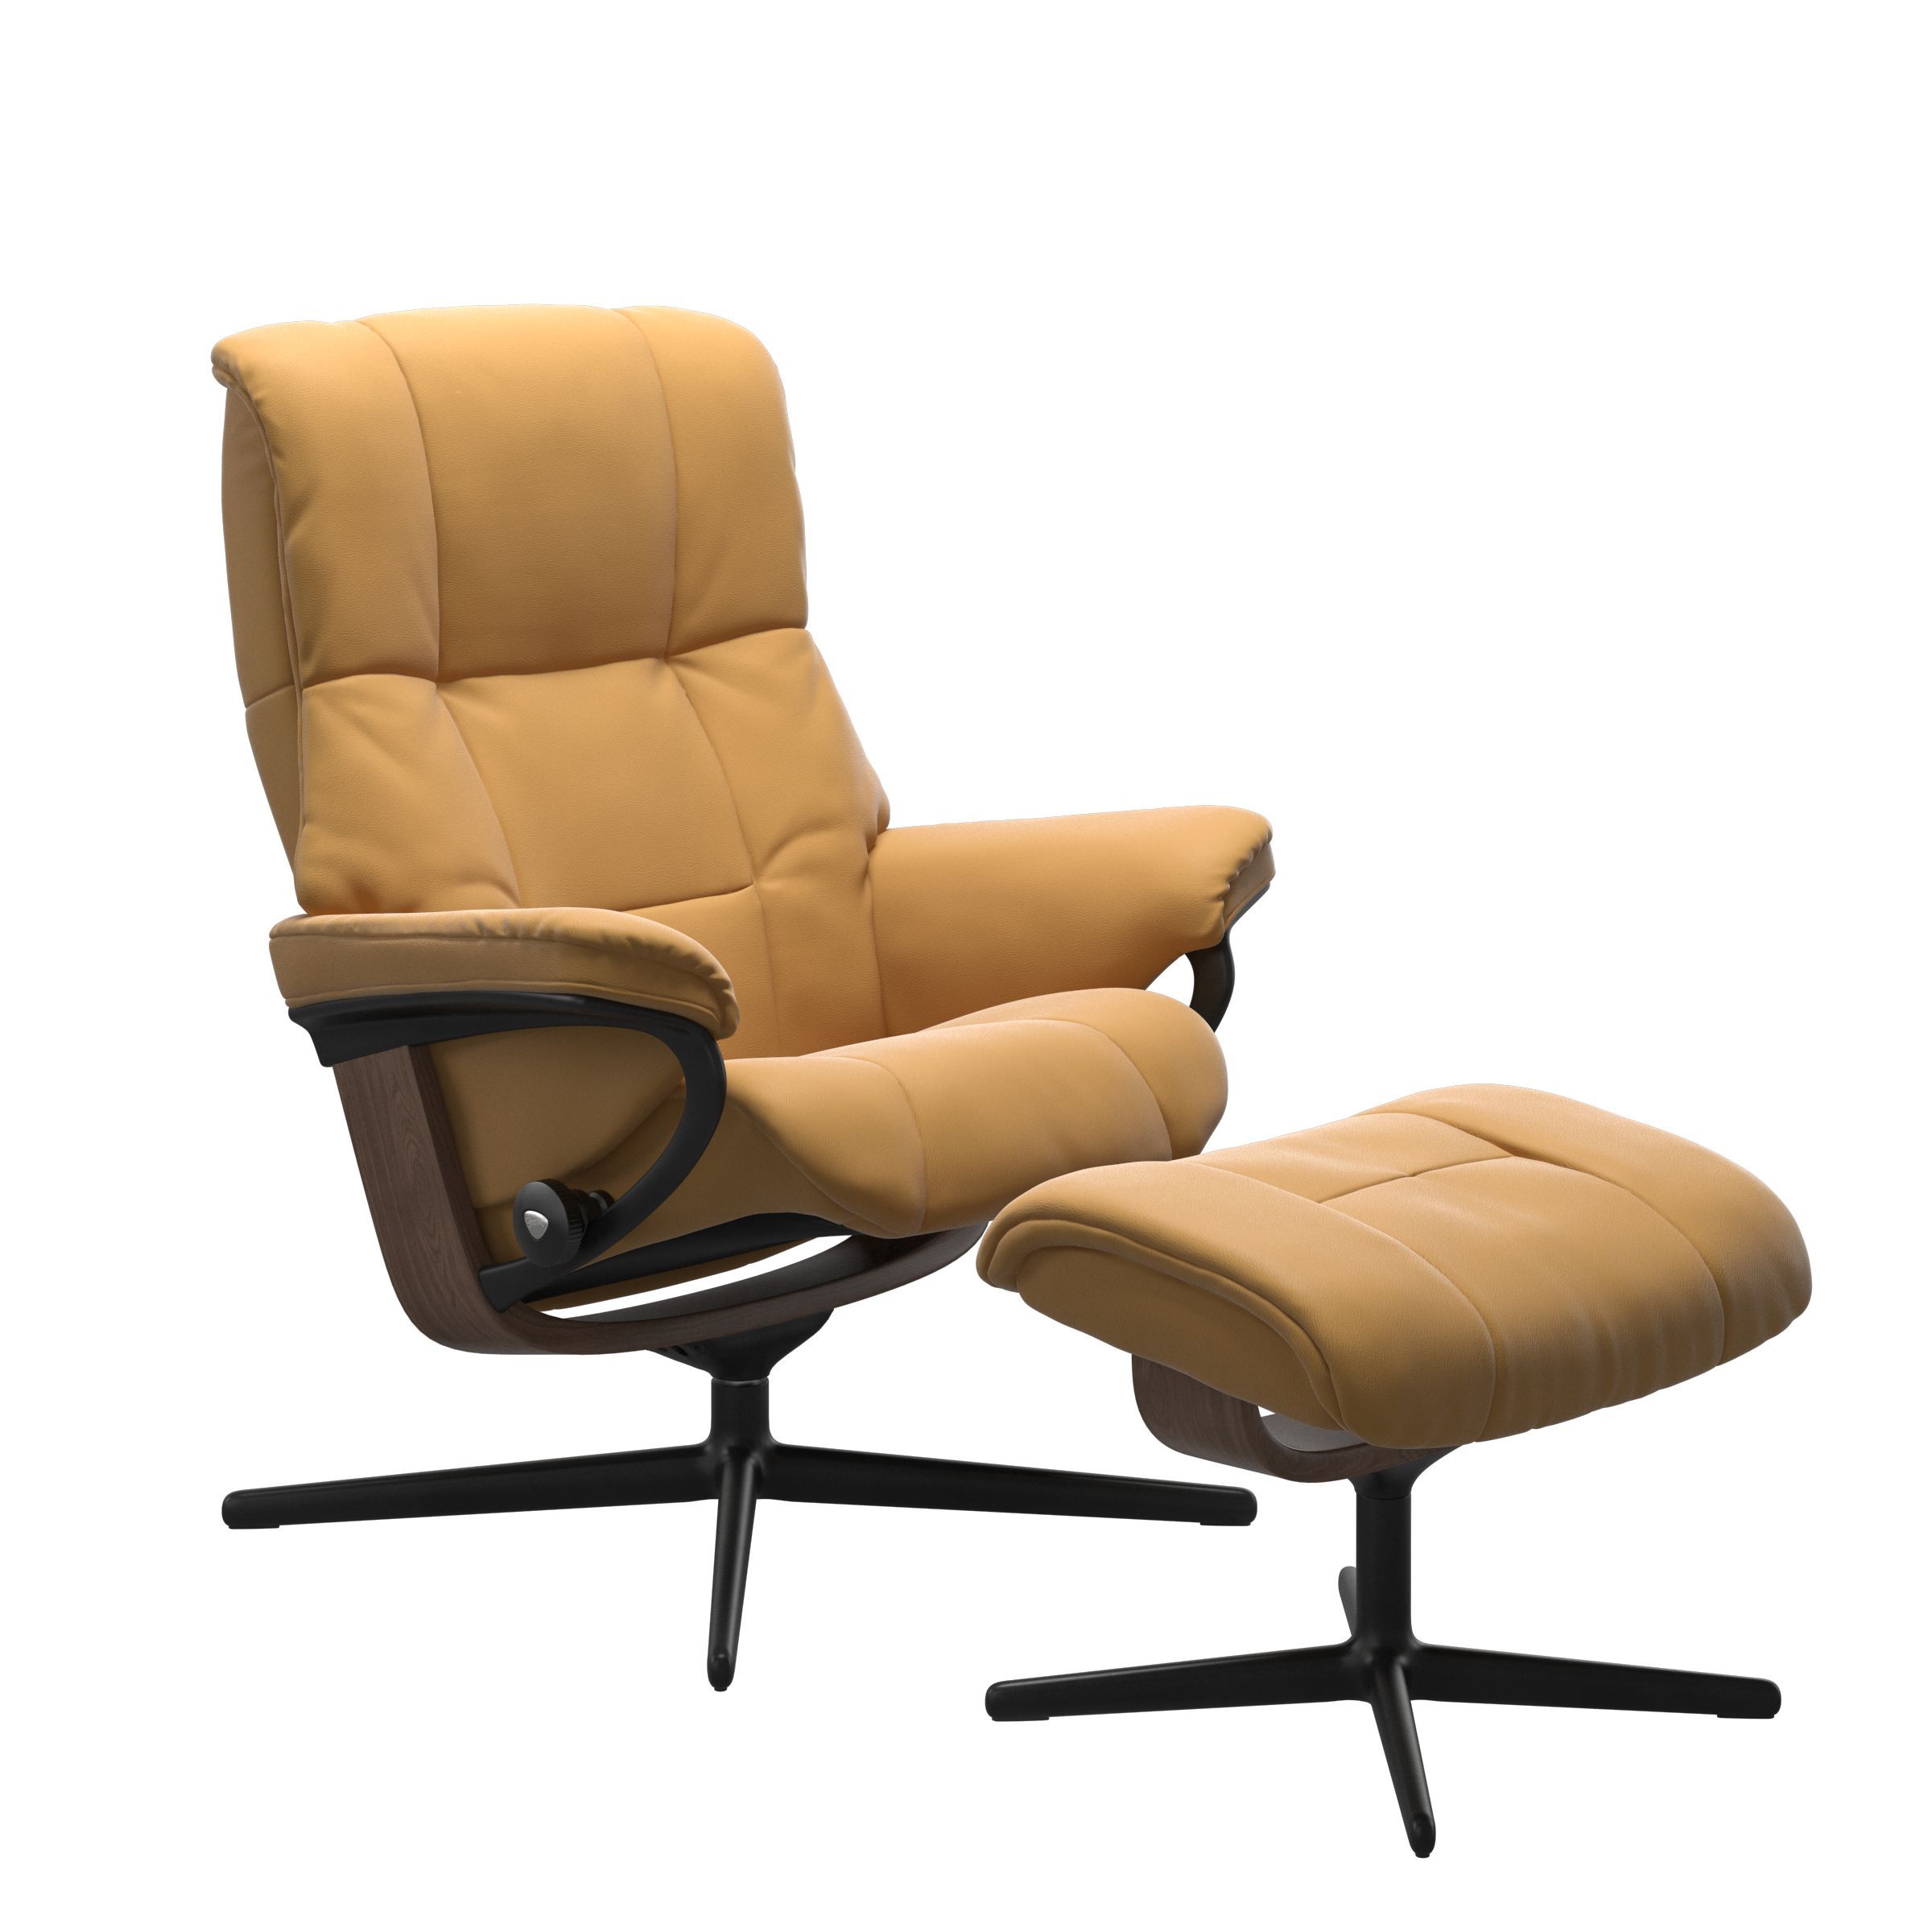 Ultimate Comfort: Small Leather Recliners
with Ottoman